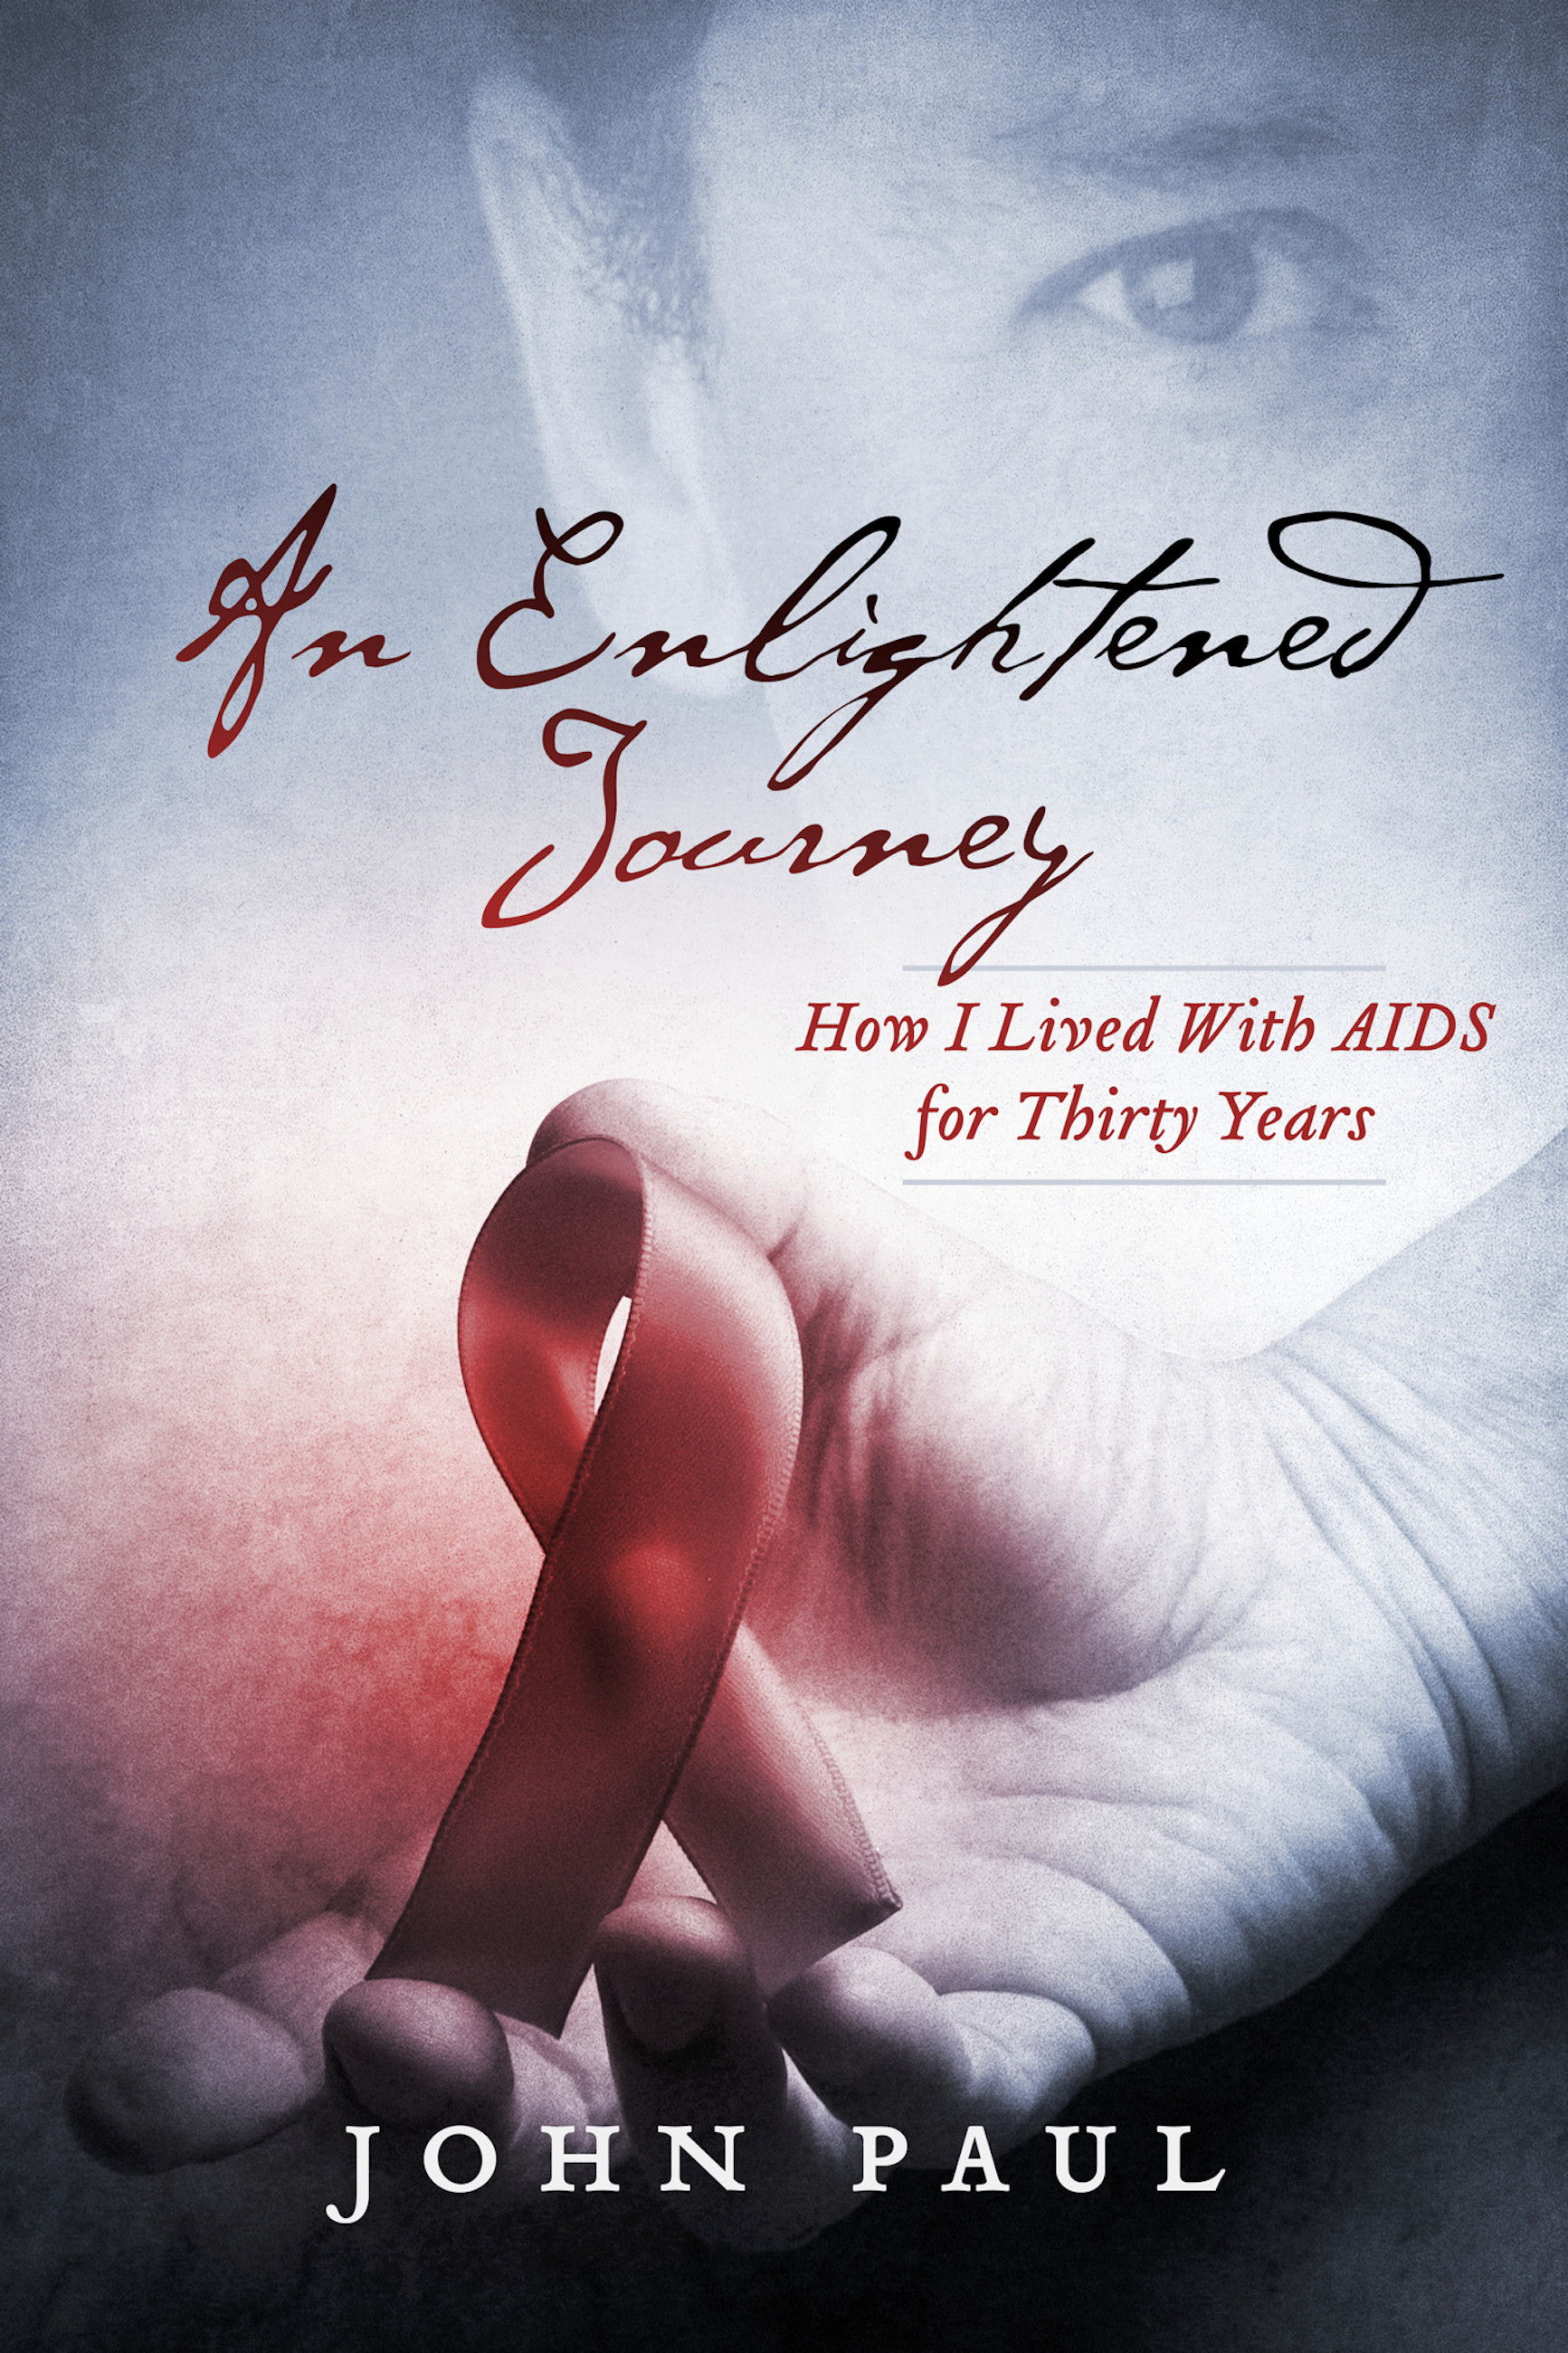 An Enlightened Journey: How I Lived With AIDS for Thirty Years